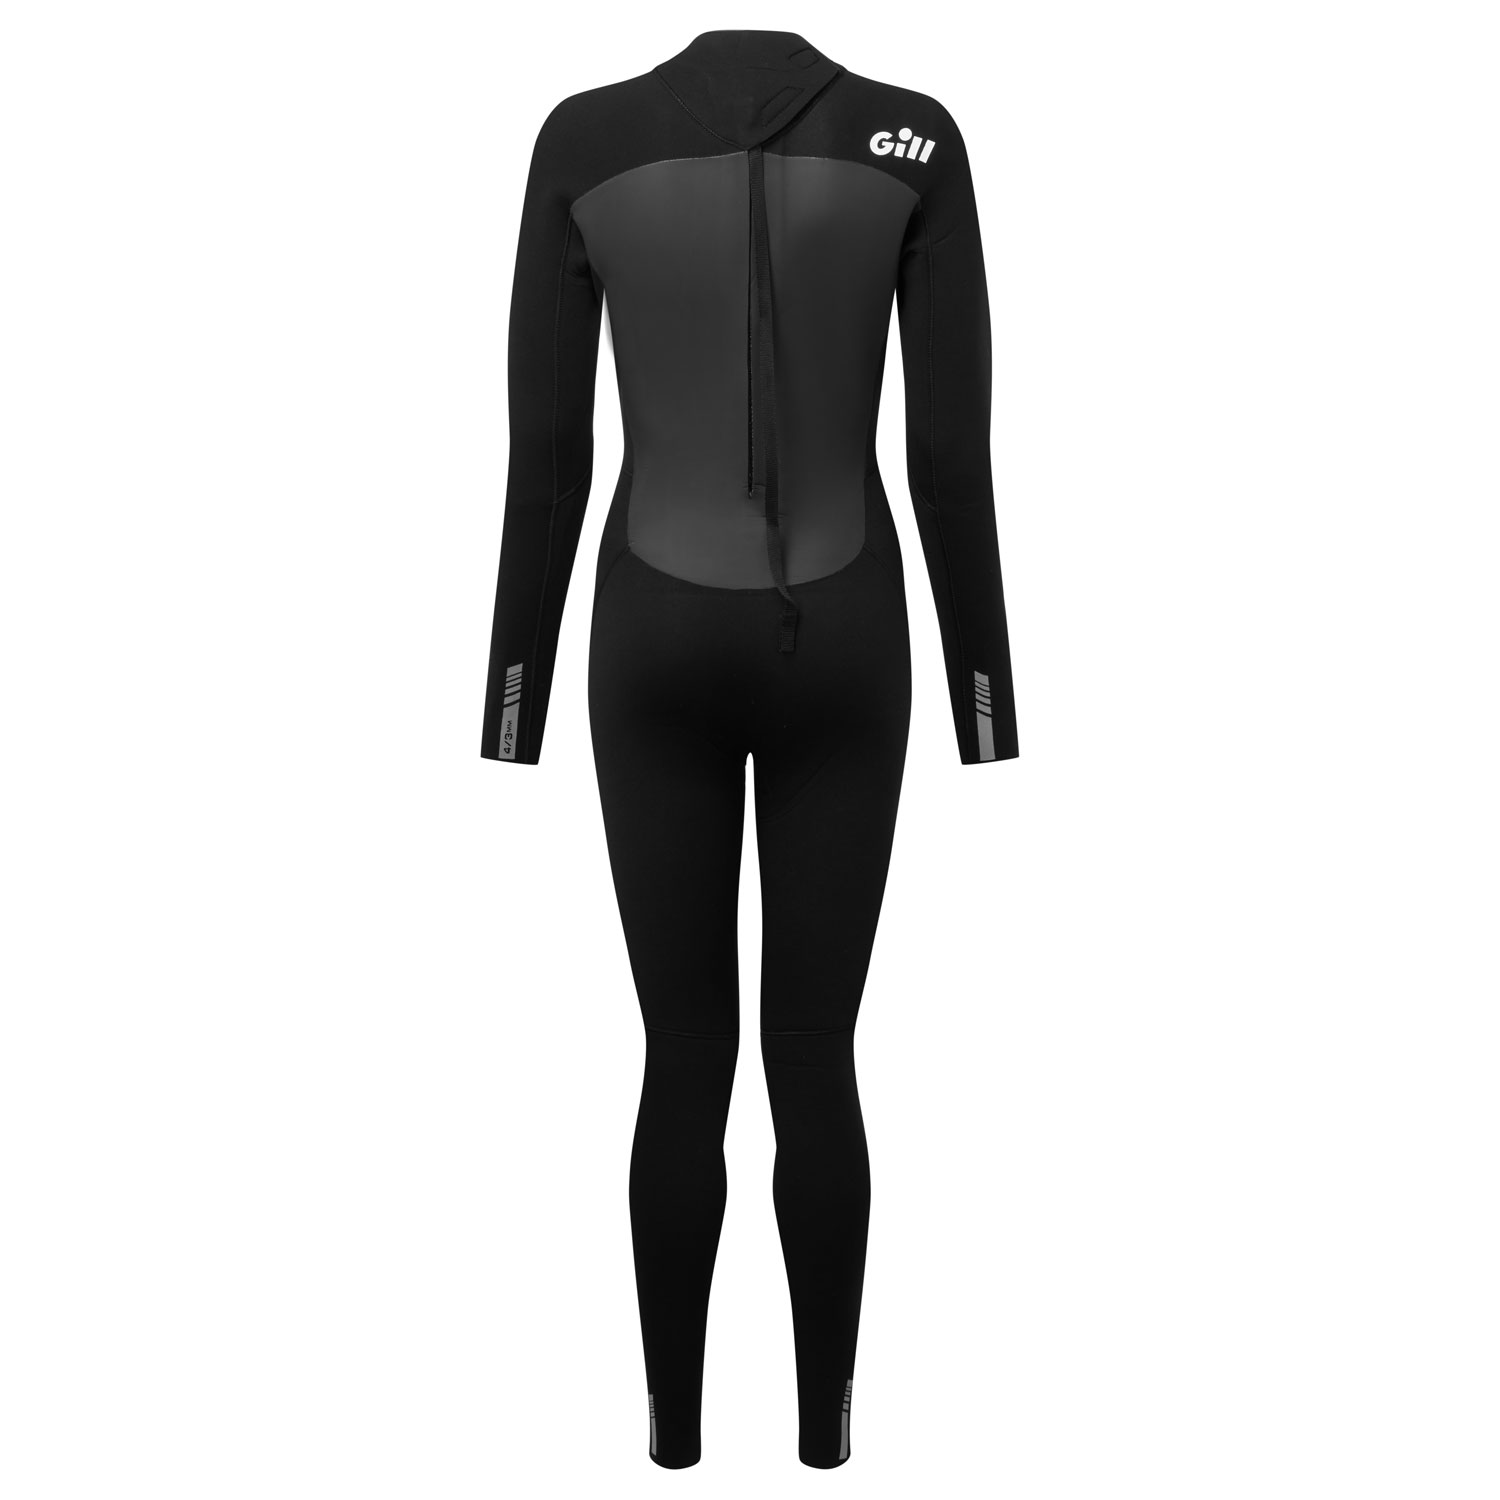 https://www.coastwatersports.com/images/products/2022-Gill-Womens-Pursuit-Wetsuit-5029W_BLACK_2.jpg